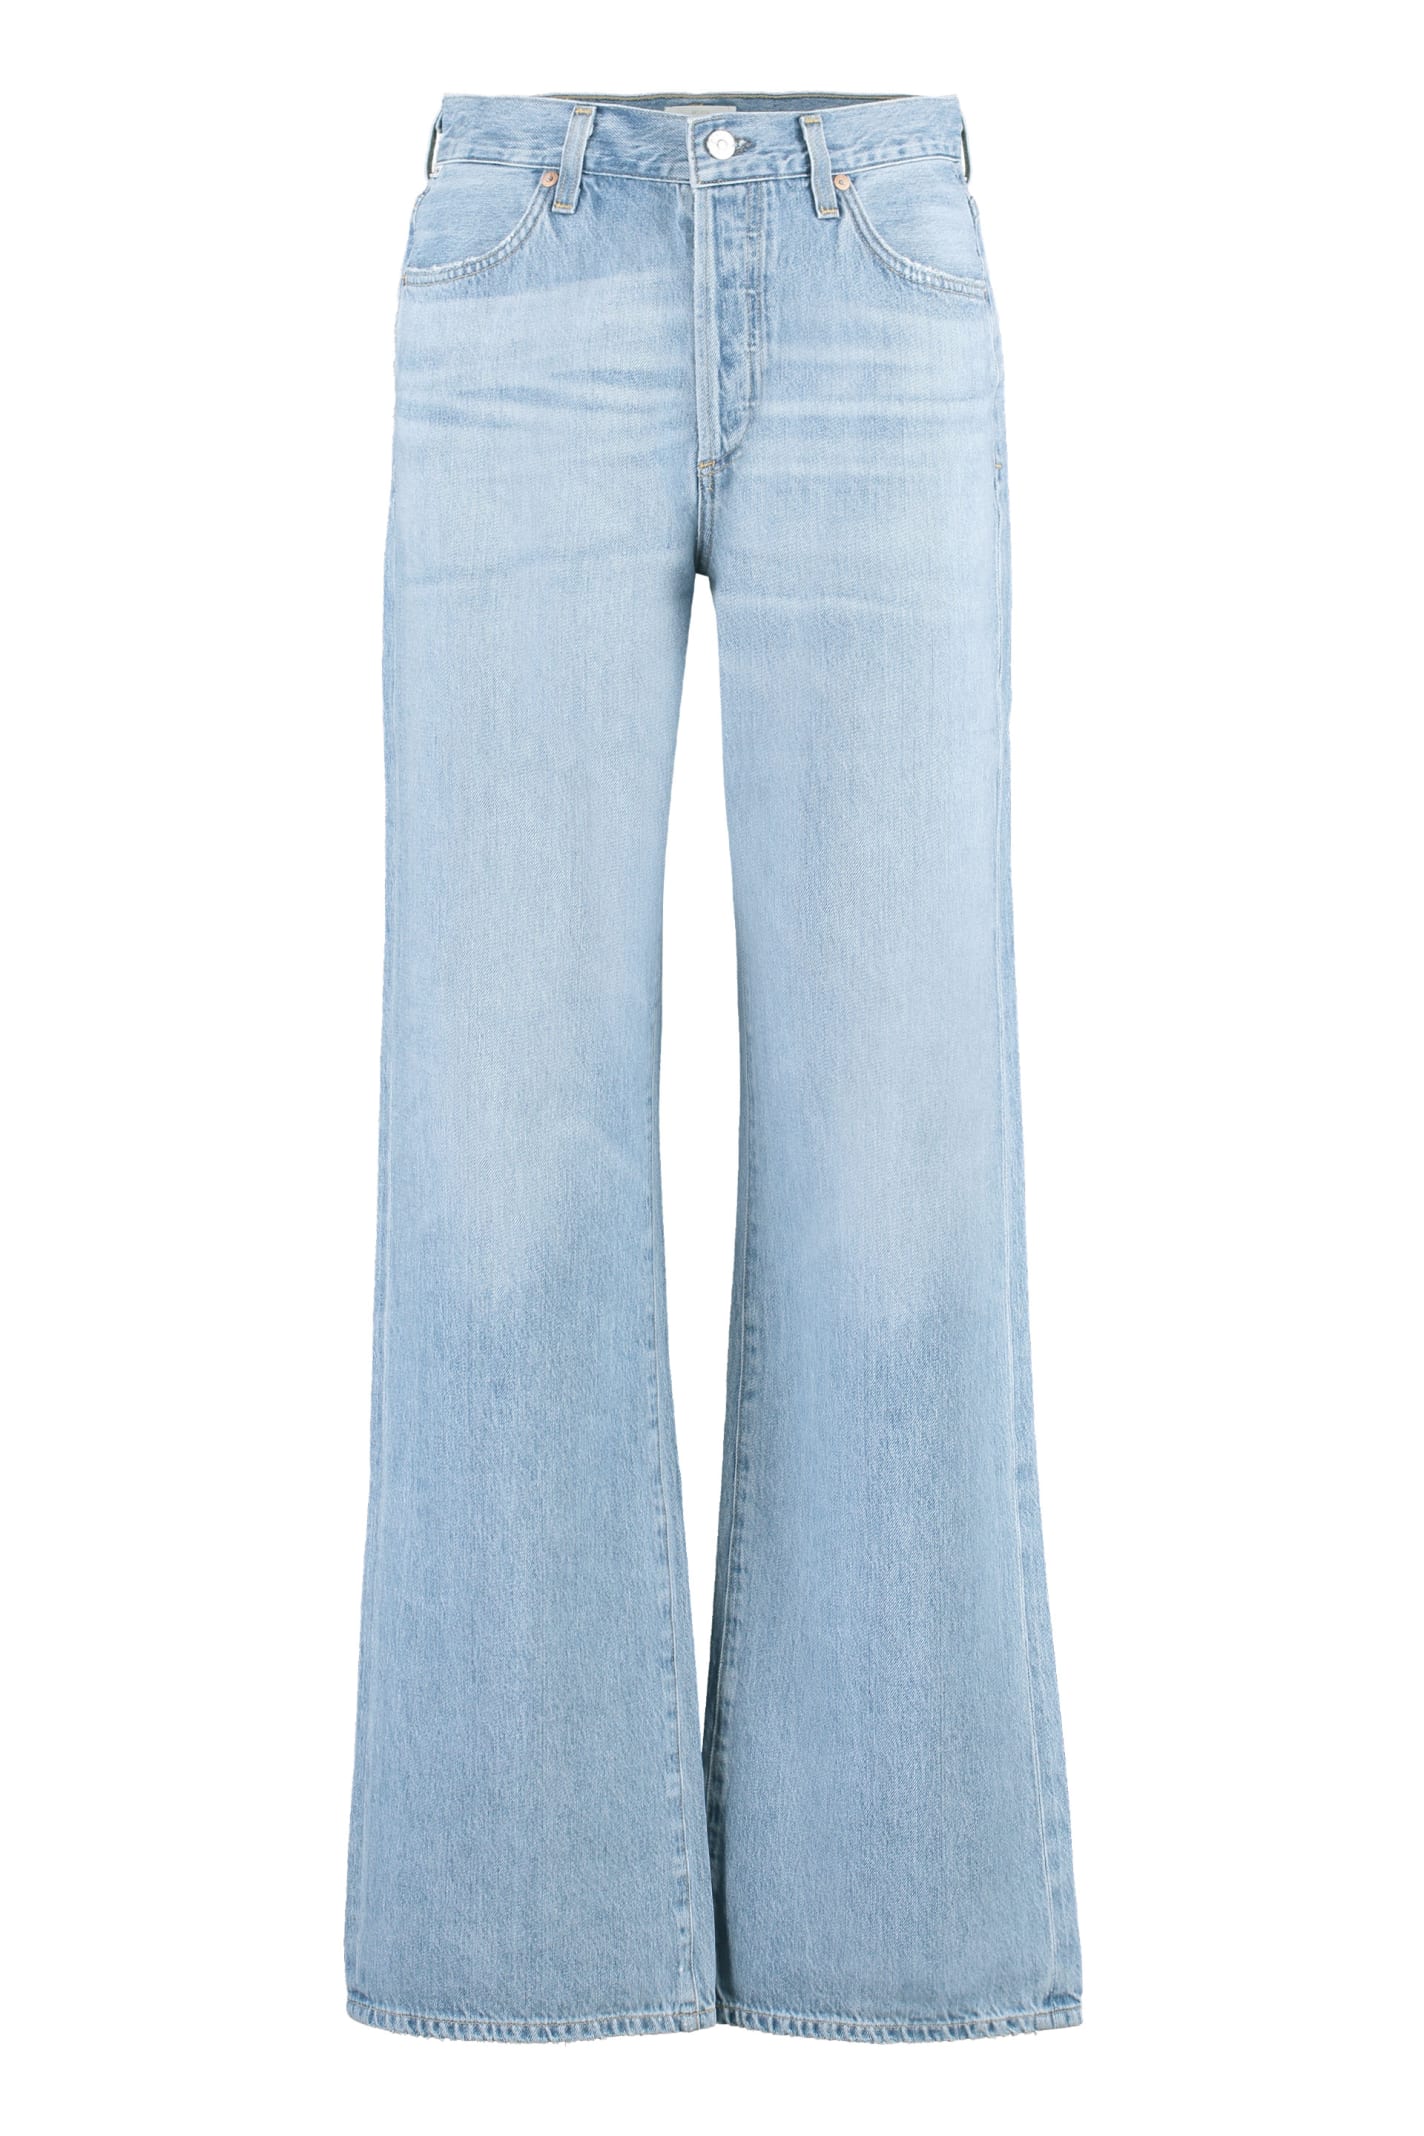 CITIZENS OF HUMANITY ANNINA WIDE-LEG JEANS